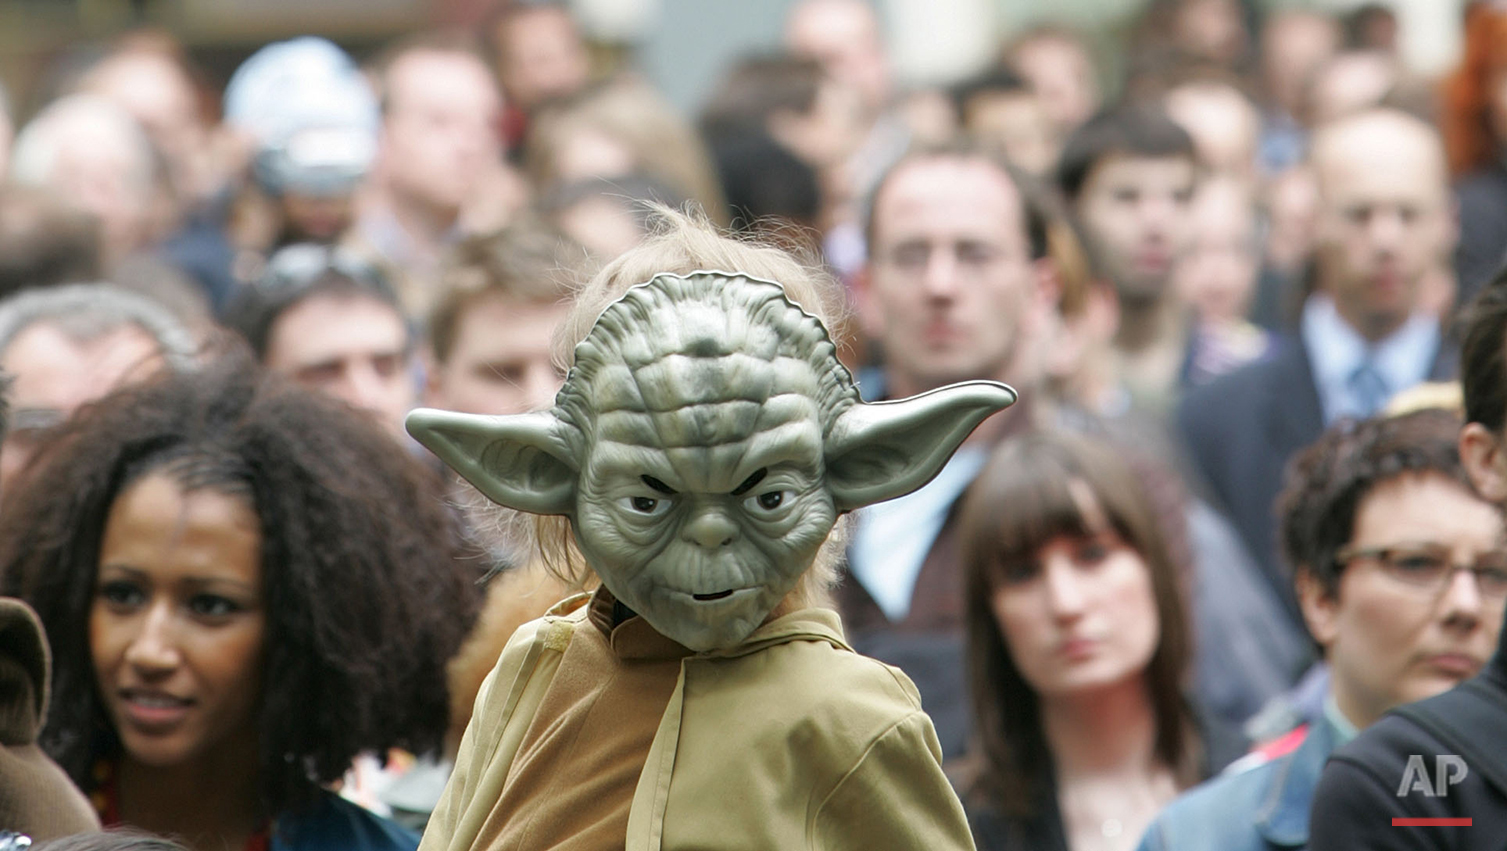  A young boy dressed as the Star Wars character 'Yoda' sits on the shoulders of a man as he watches events in Leicester Square in London and joins in with the premier launch of the film Star Wars Episode III Revenge of the Sith,  Monday May 16, 2005.